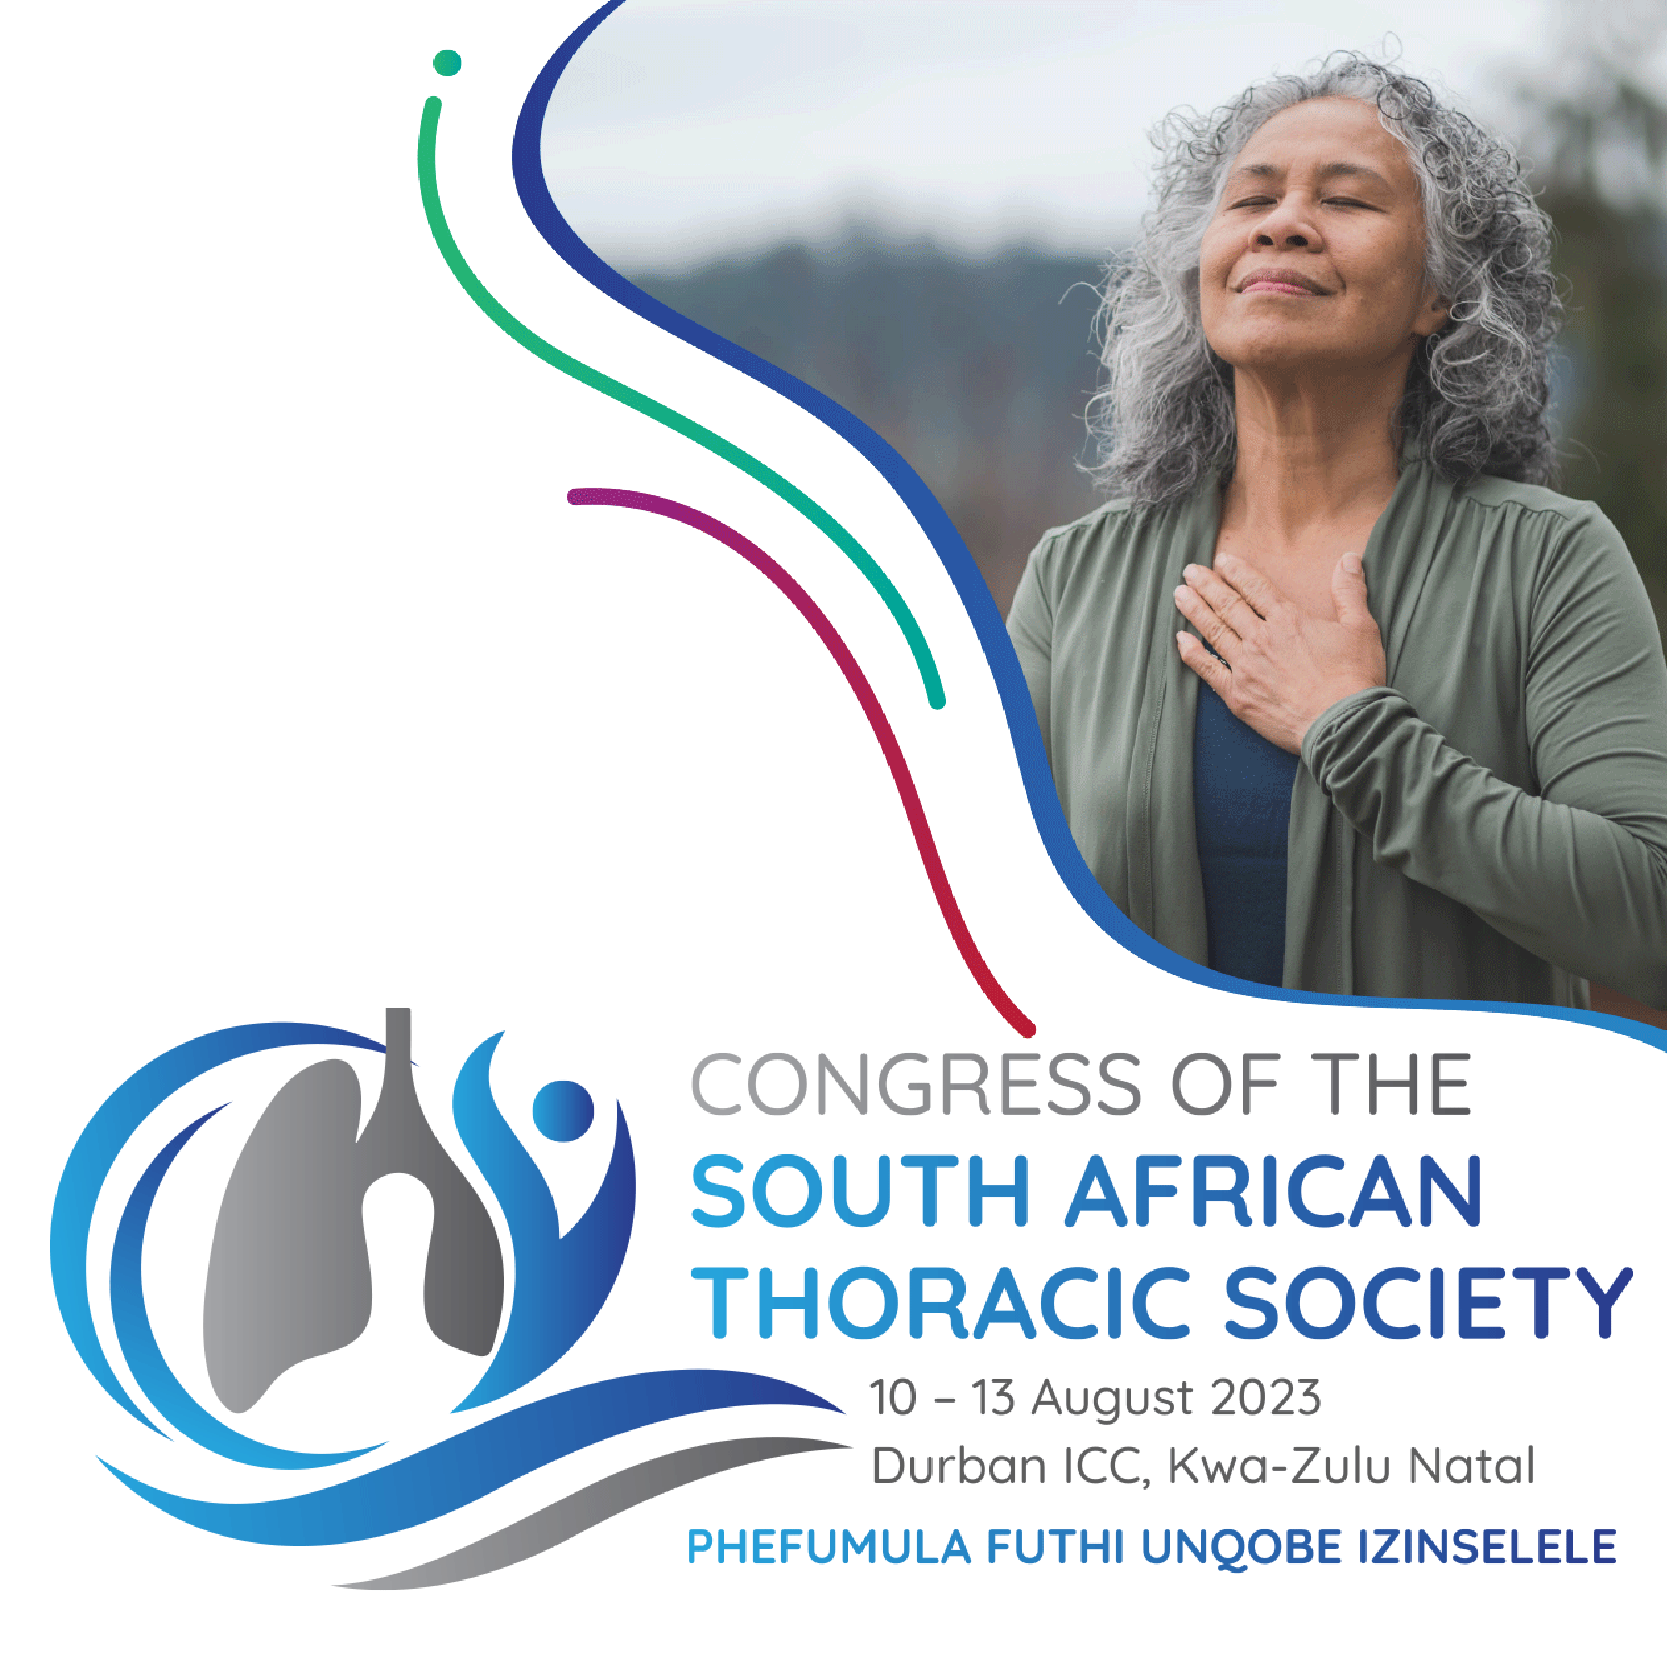 South African Thoracic Society Congress - SATS 2023